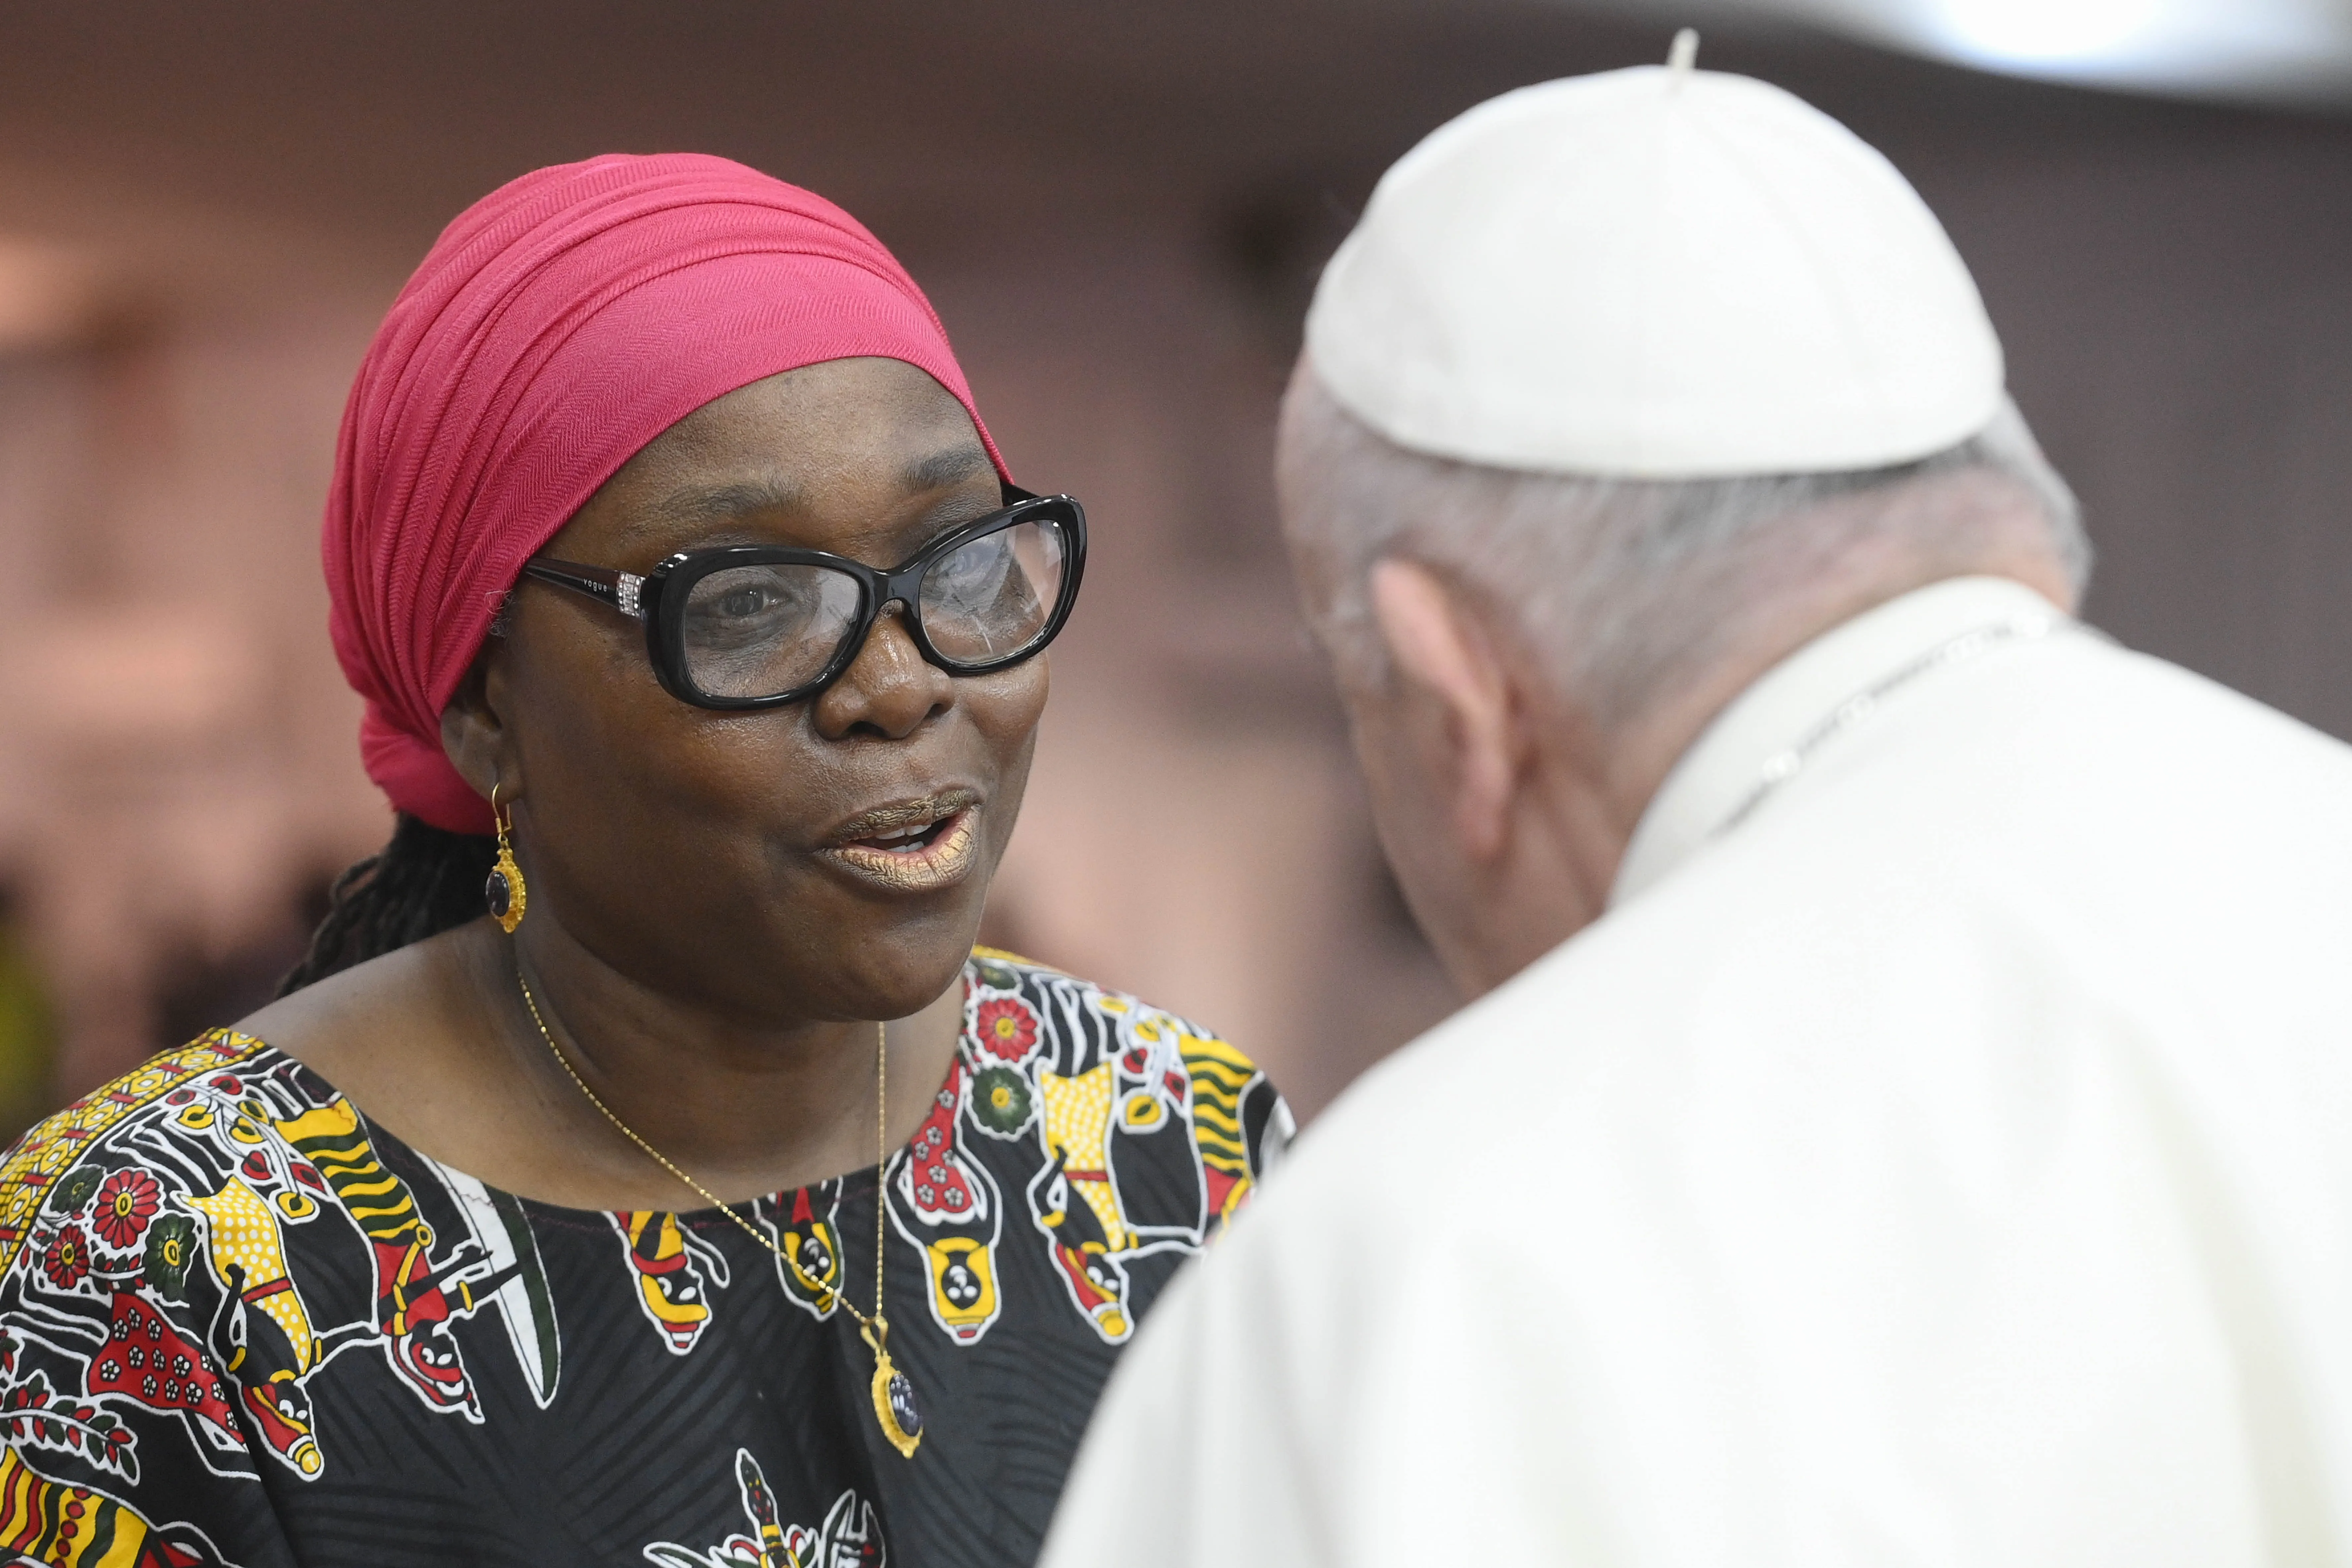 Pope Francis greets Sara Beysolow Nyanti, a representative of the United Nations Mission in South Sudan, during a gathering with 2,500 internally displaced persons in Juba, South Sudan, on Feb. 4, 2023. Vatican Media